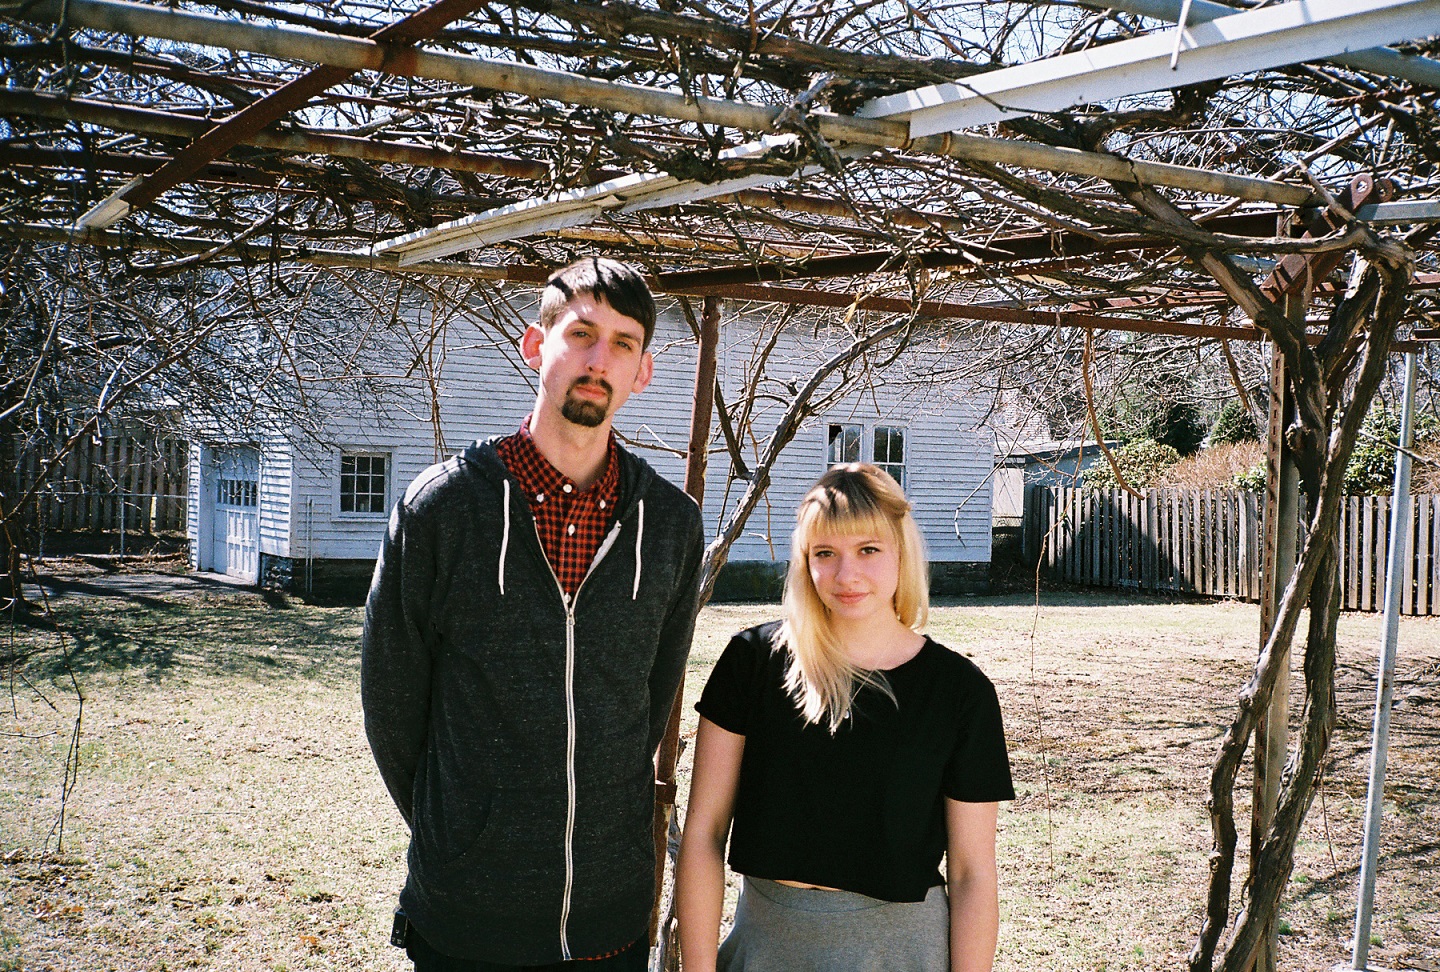 TIGERS JAW FINALLY UNCAGES LONG-AWAITED “CHARMER”